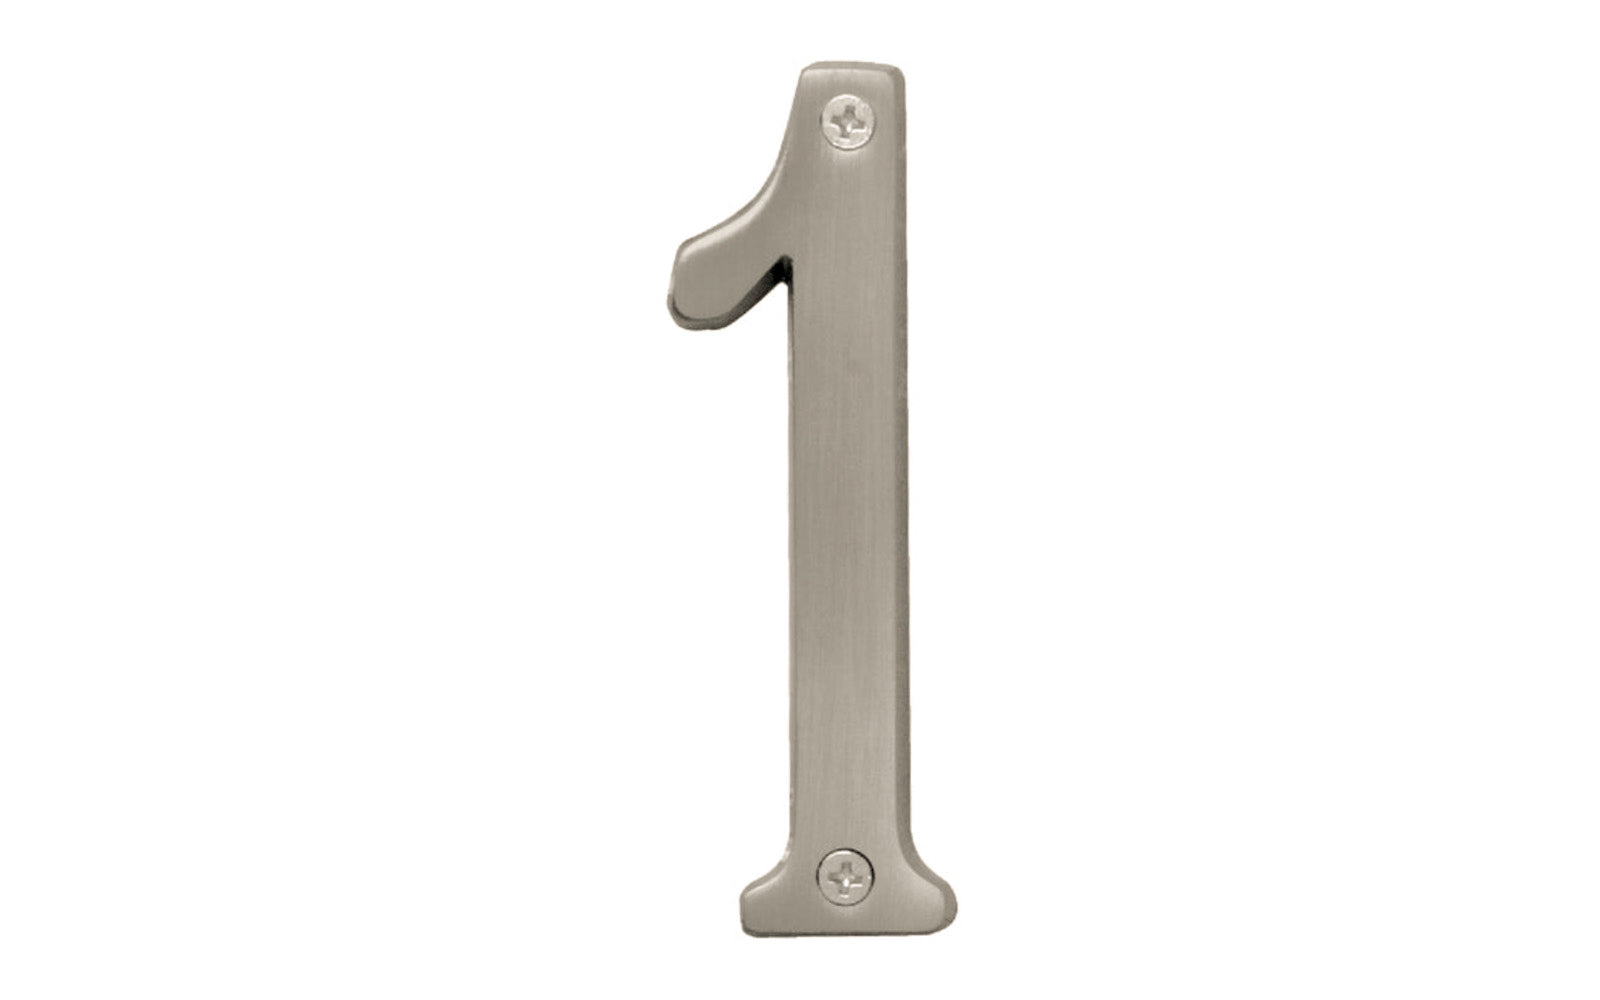 Number One House Number in a 4" size. Satin nickel finish. Includes two phillips flat head screws. #1 house number. Hy-Ko Model BR-43SN/1. Hardware house numbers for outdoors. Includes screws. 029069309312. #1 Satin Nickel House Number - 4" Size